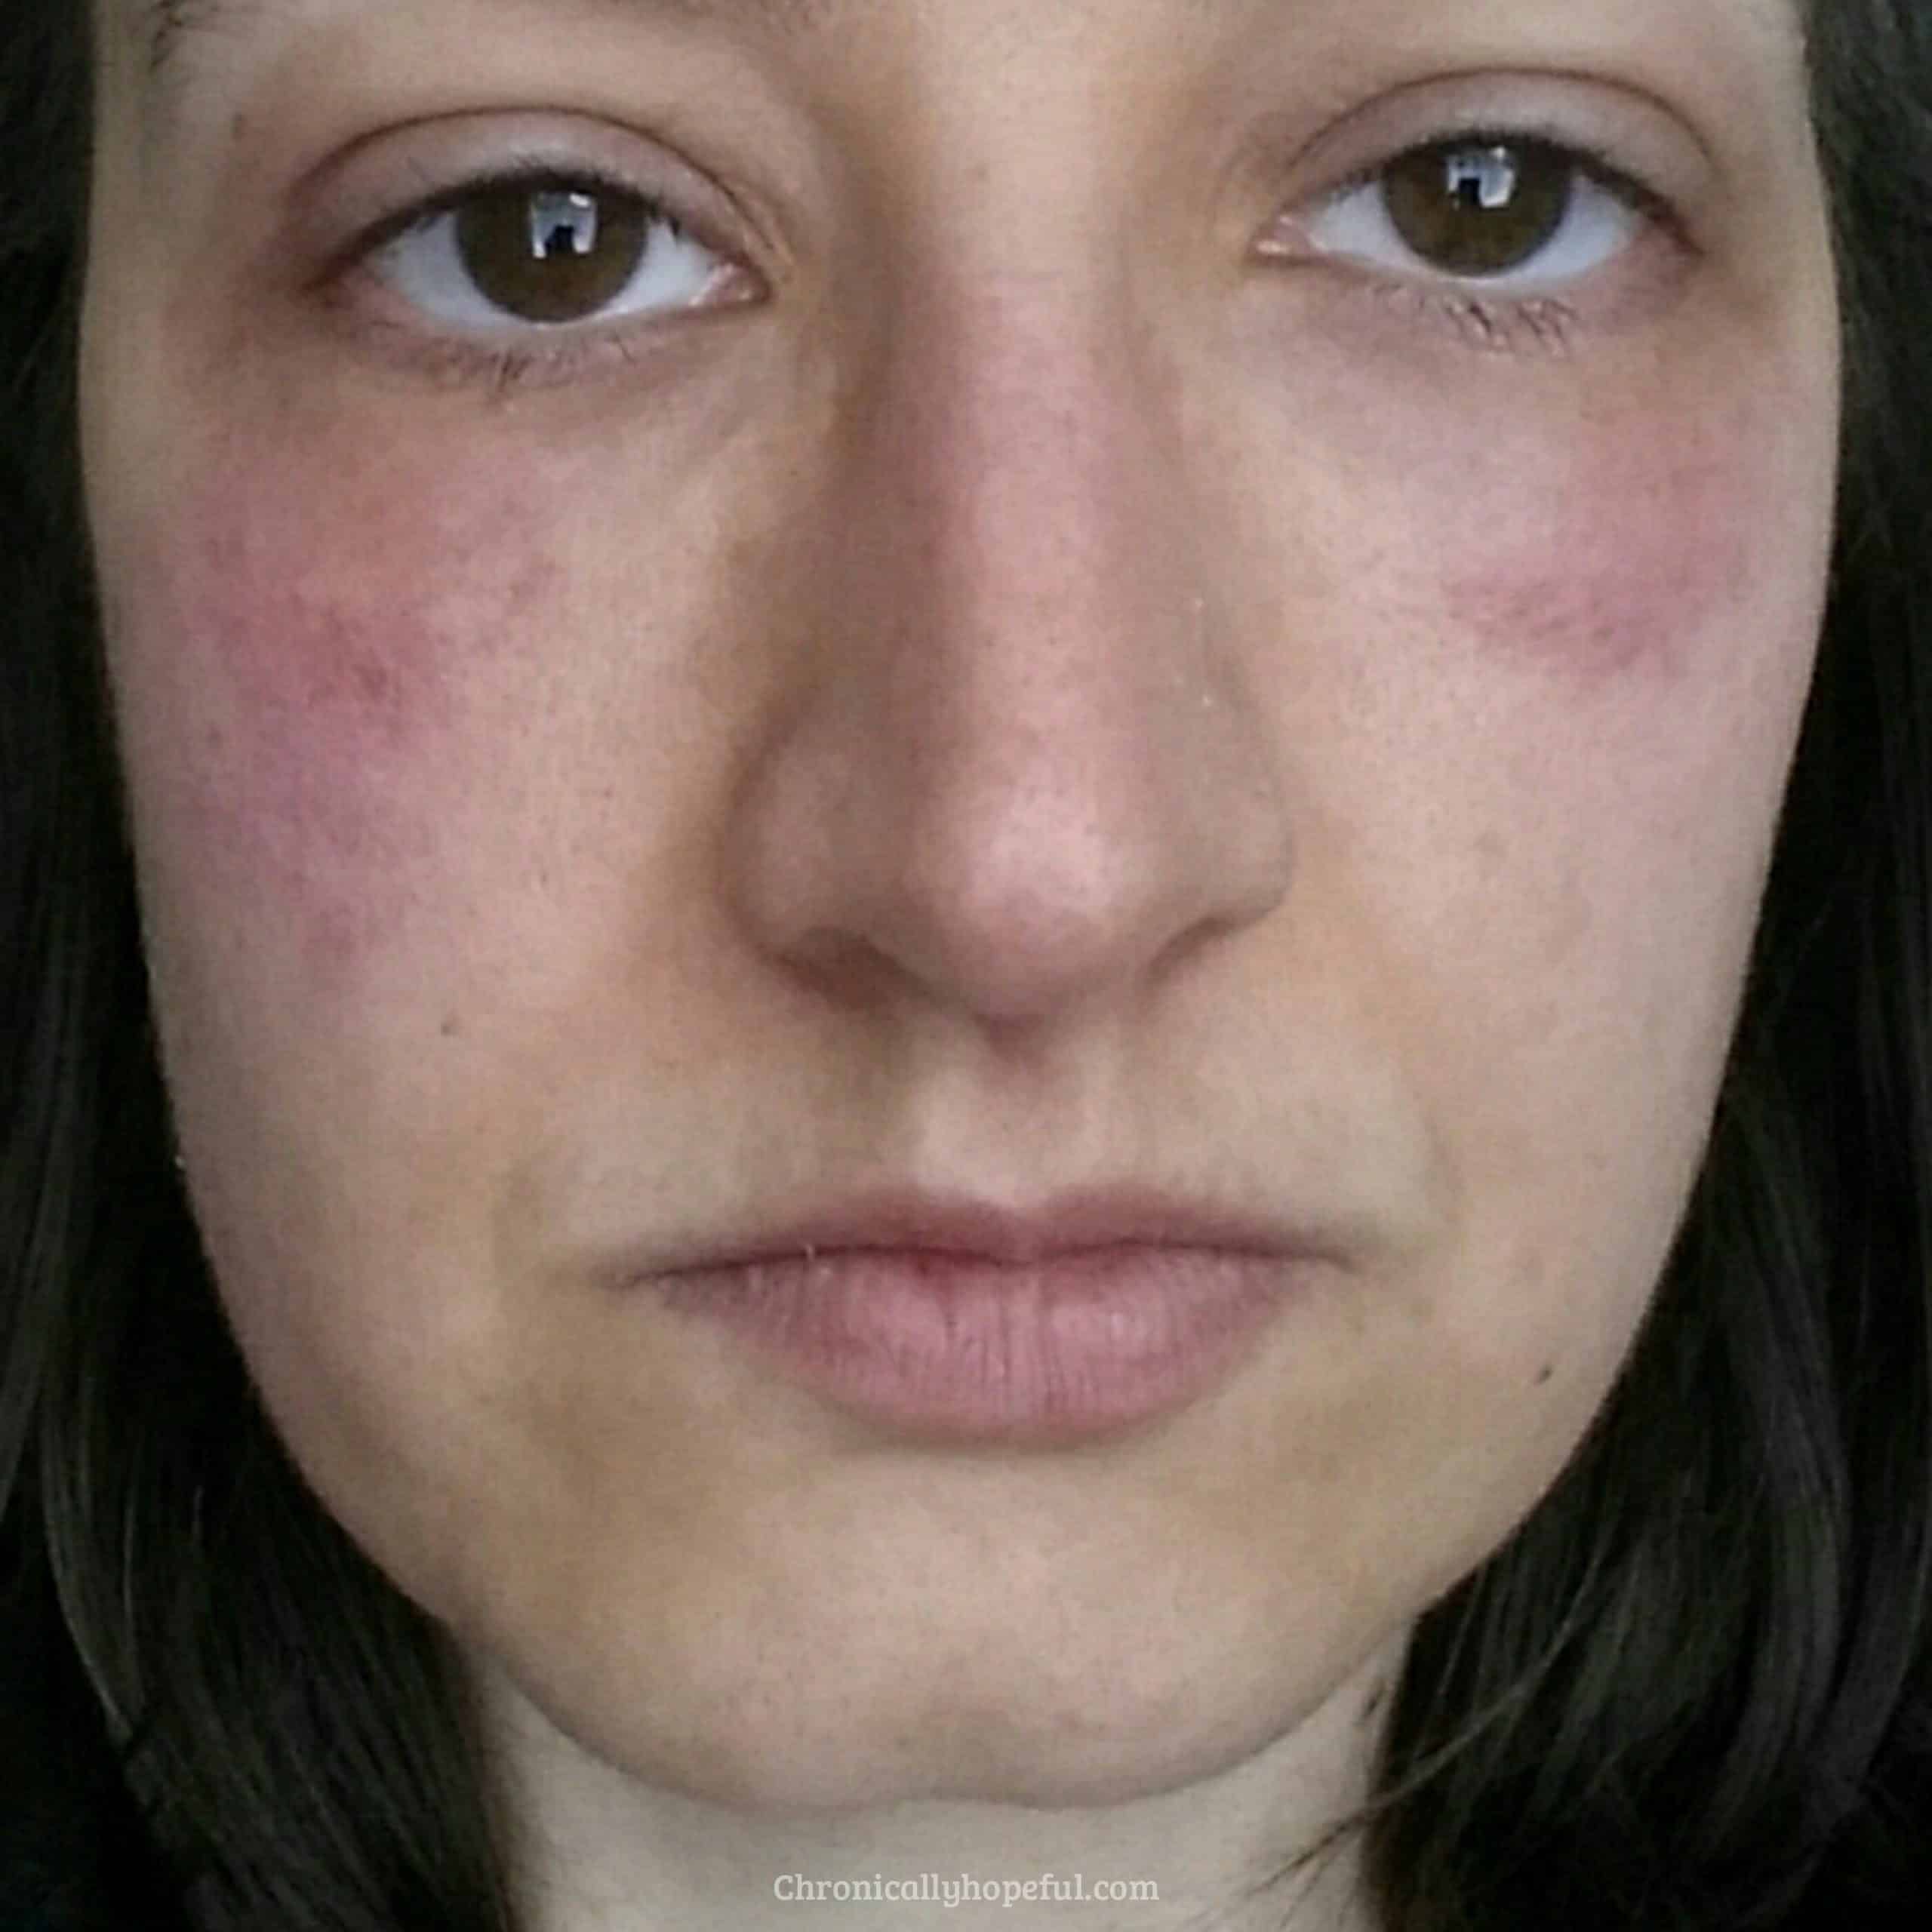 Histamine Intolerance, How Im Reducing My Rashes And Hives